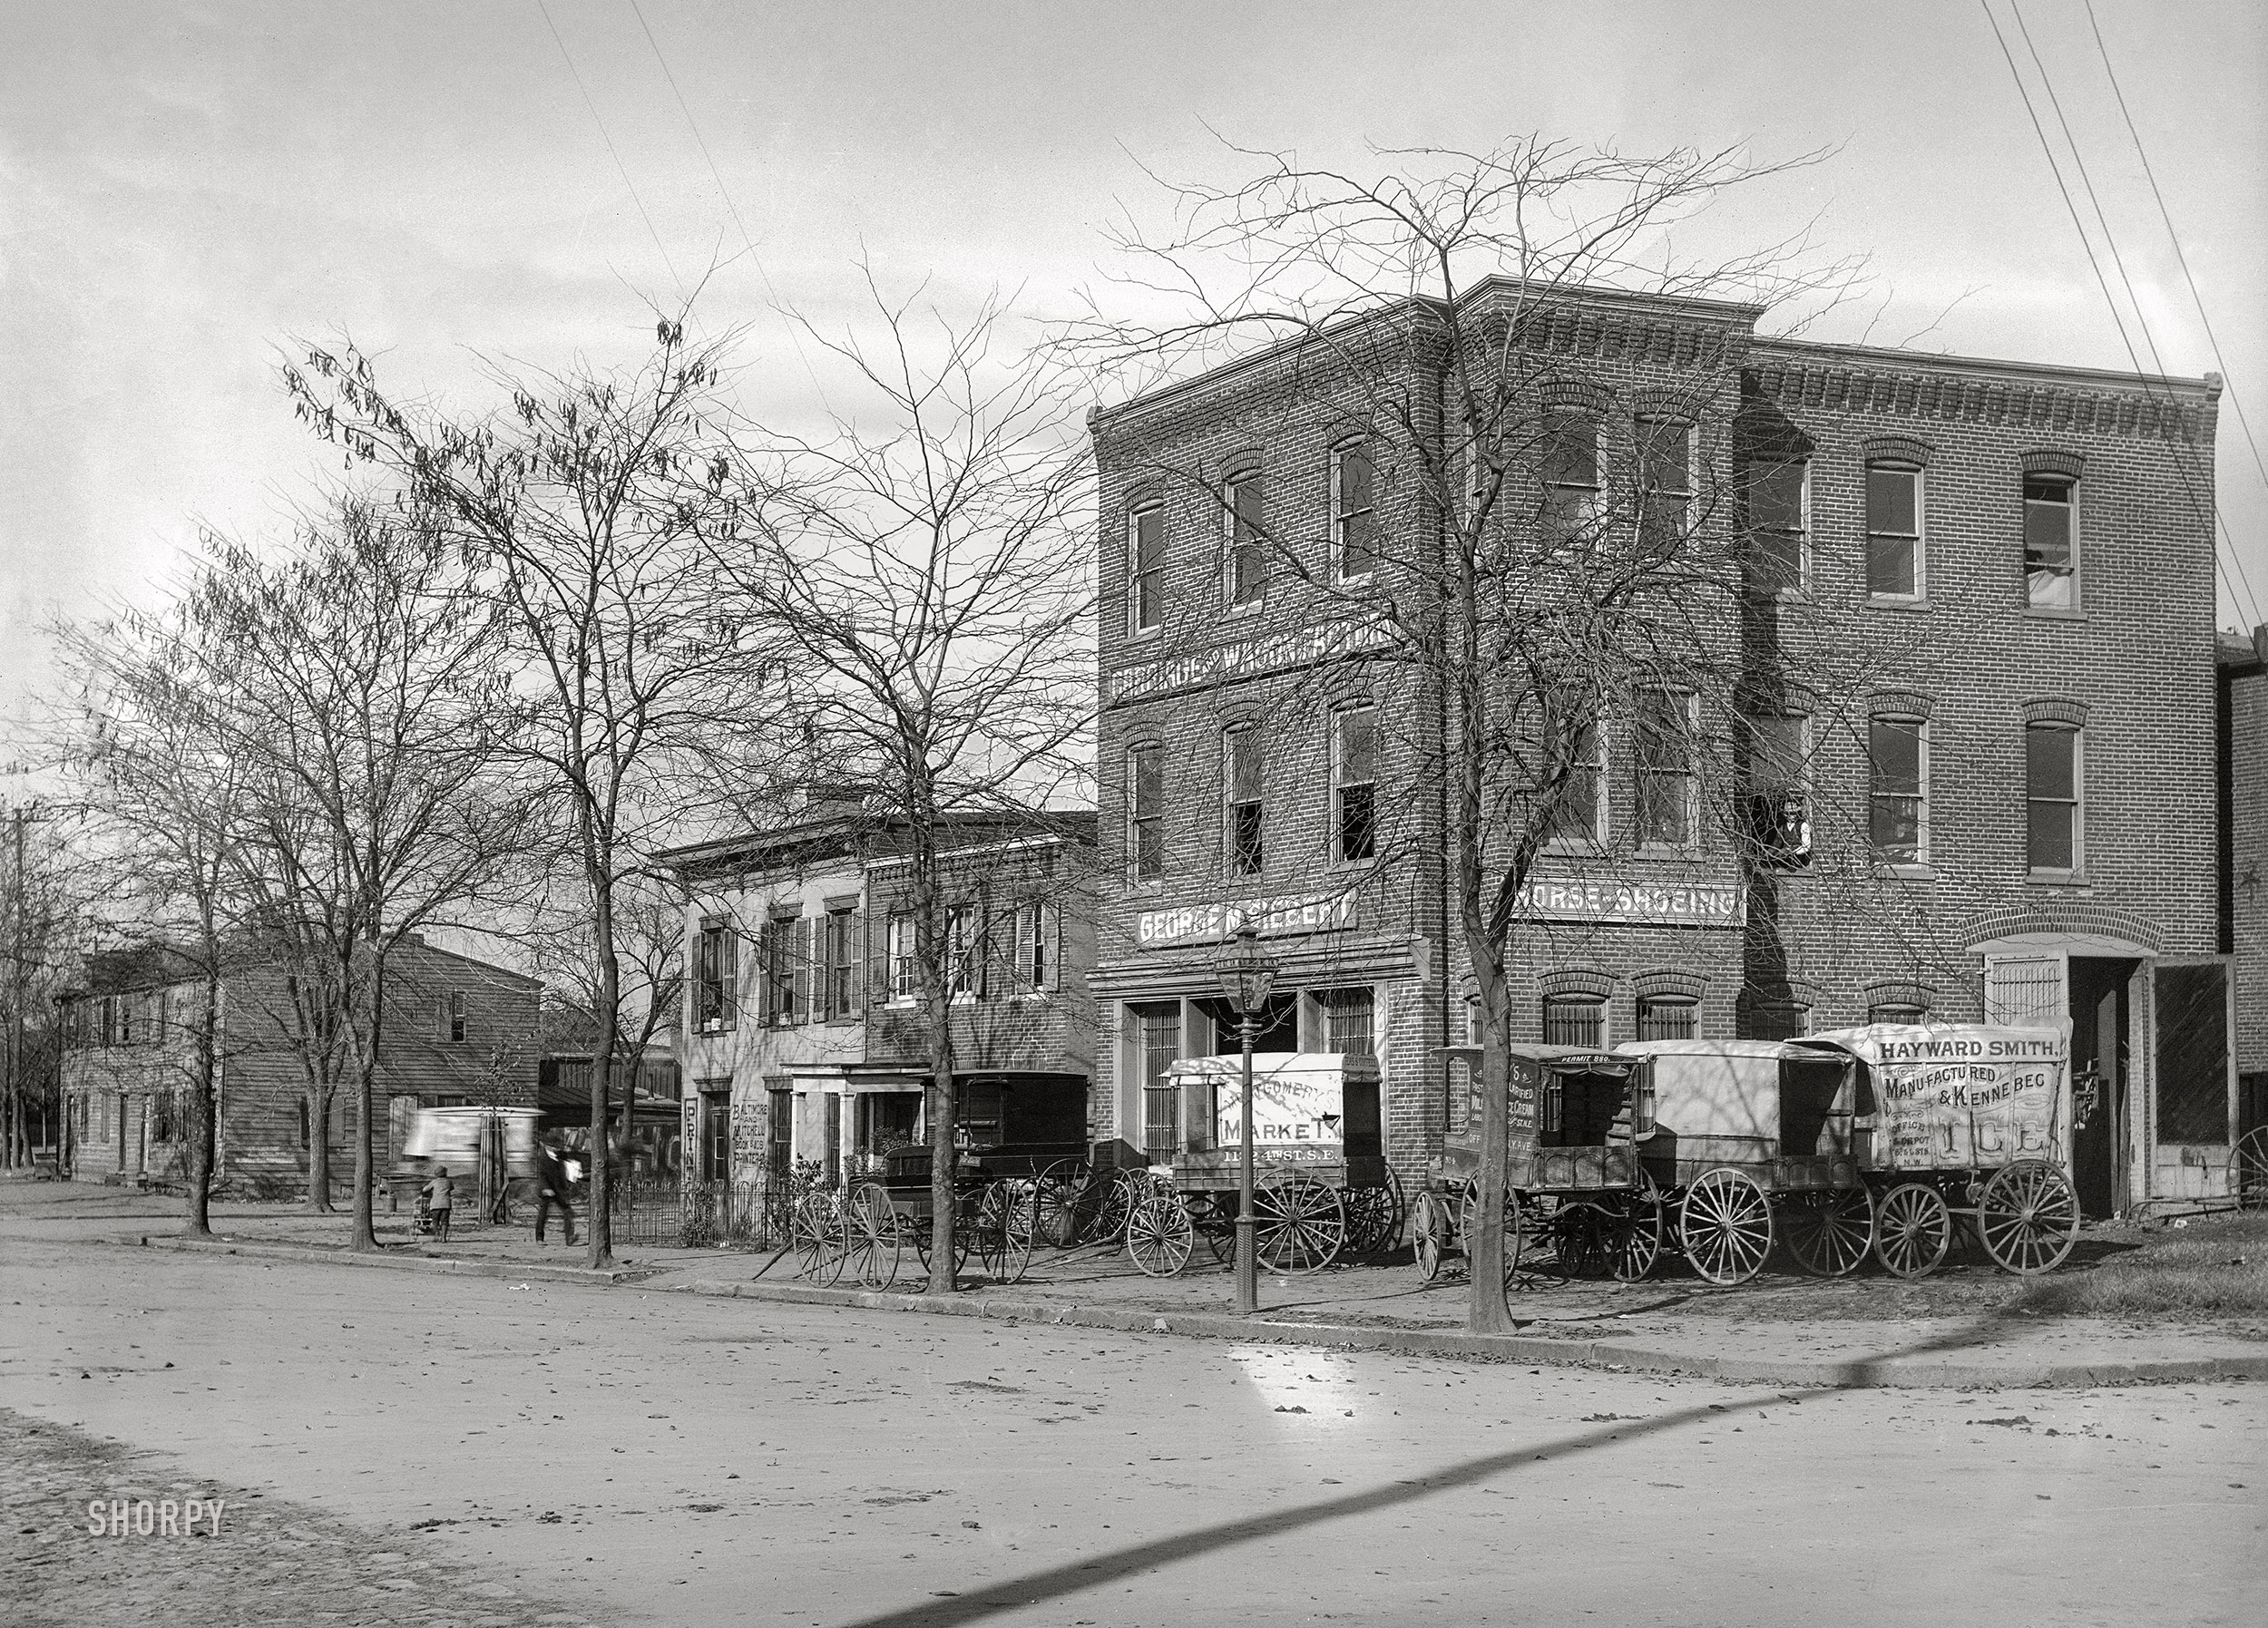 &nbsp; &nbsp; &nbsp; &nbsp; Back when you could leave your ice-wagon at the blacksmith's unlocked.
Washington, D.C., circa 1901. "View of E Street S.W. between Delaware Avenue & First Street, looking northwest." 5x7 inch glass negative, D.C. Street Survey Collection.  View full size.